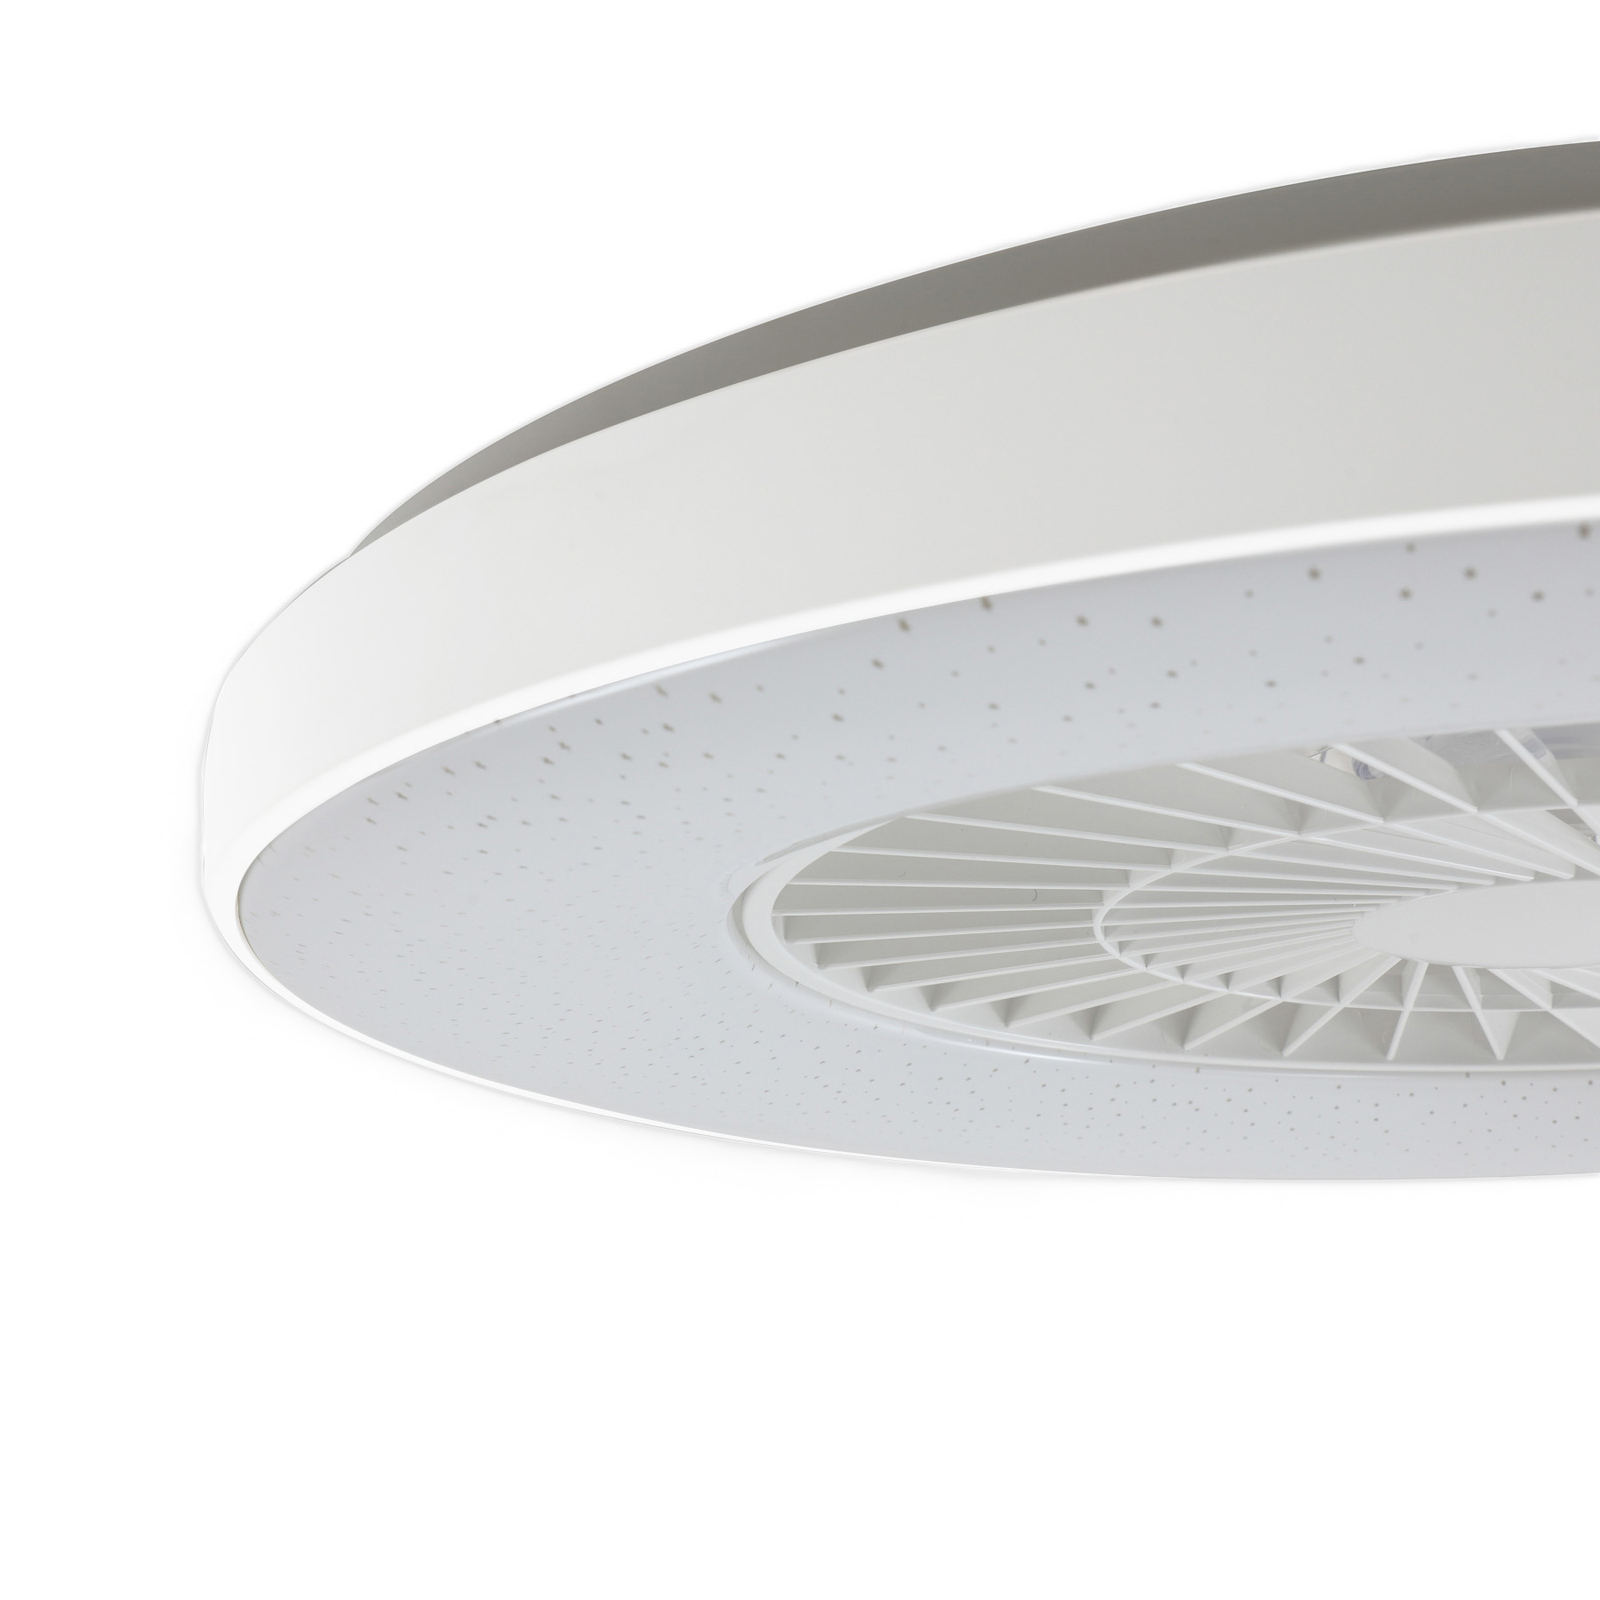 Lindby Smart LED ceiling fan Paavo, white, quiet, Tuya